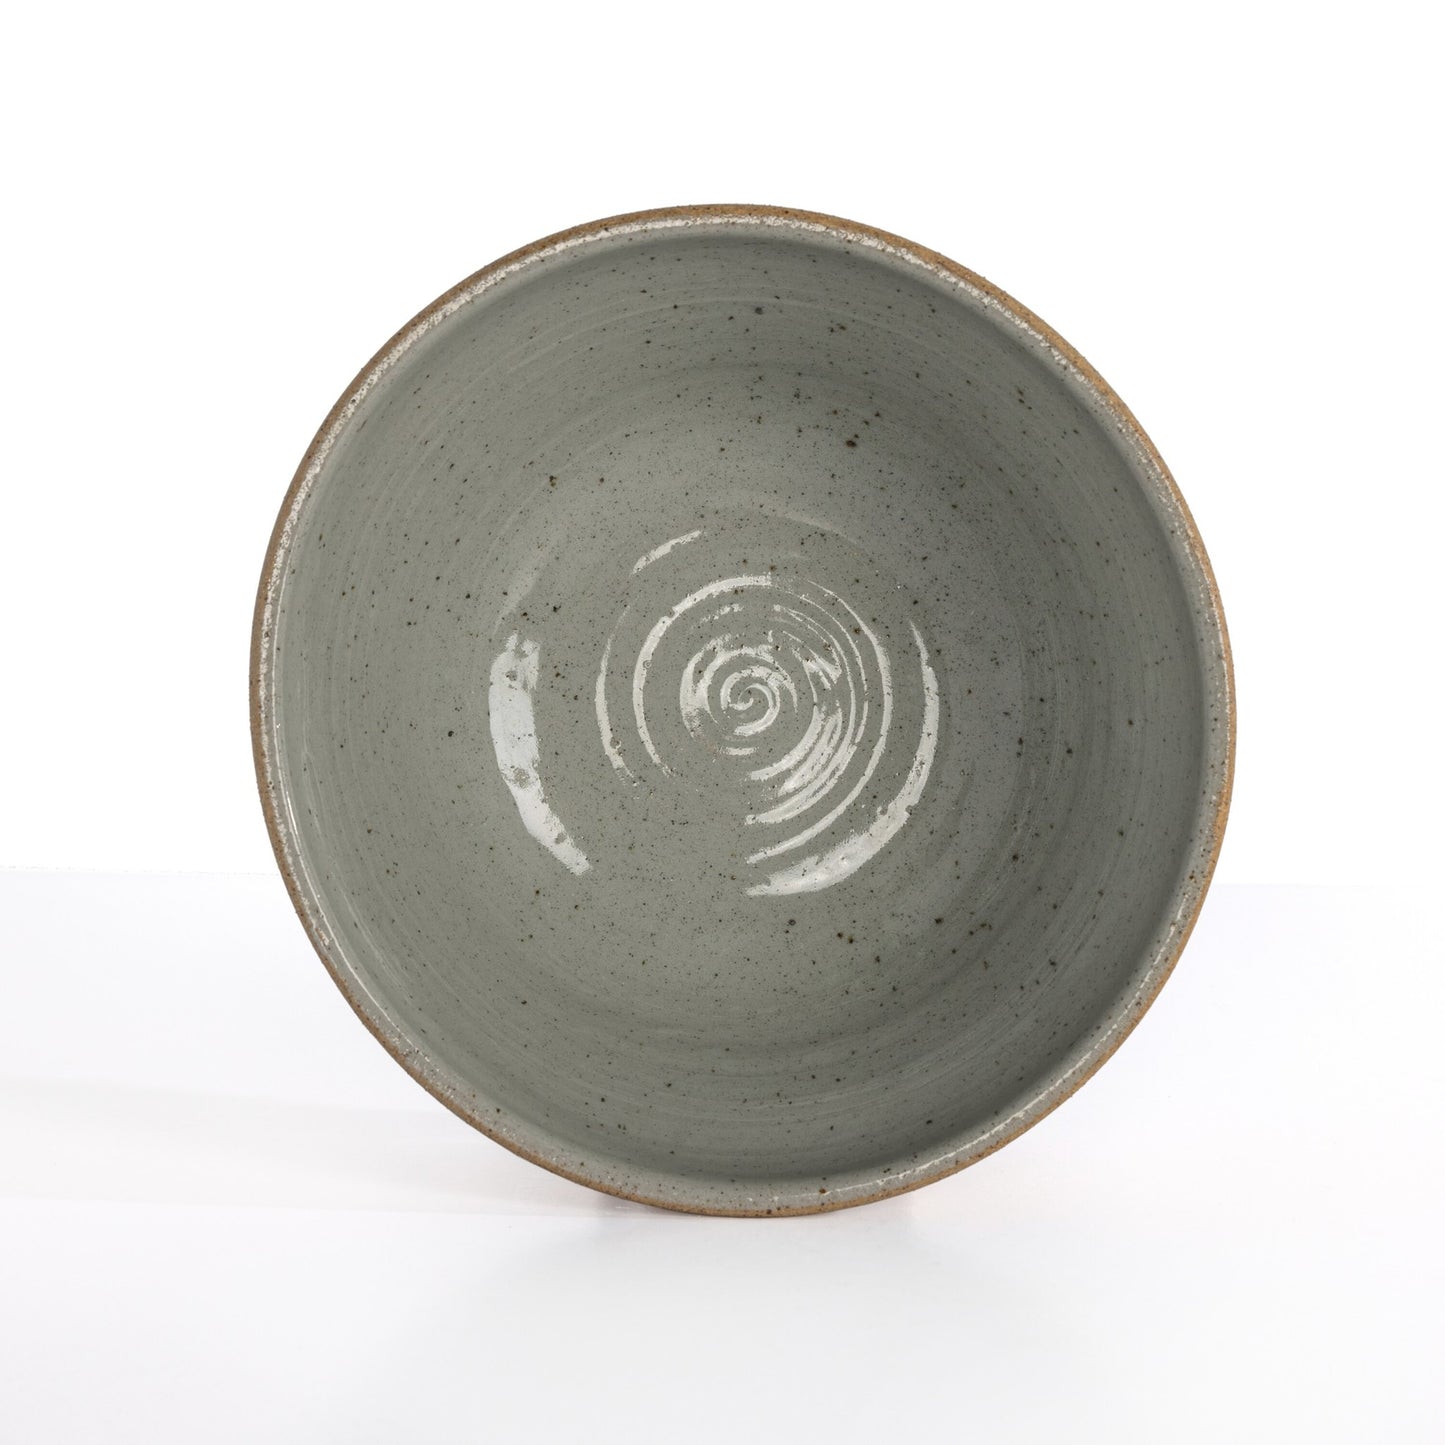 Nelo serving bowl-natural clay